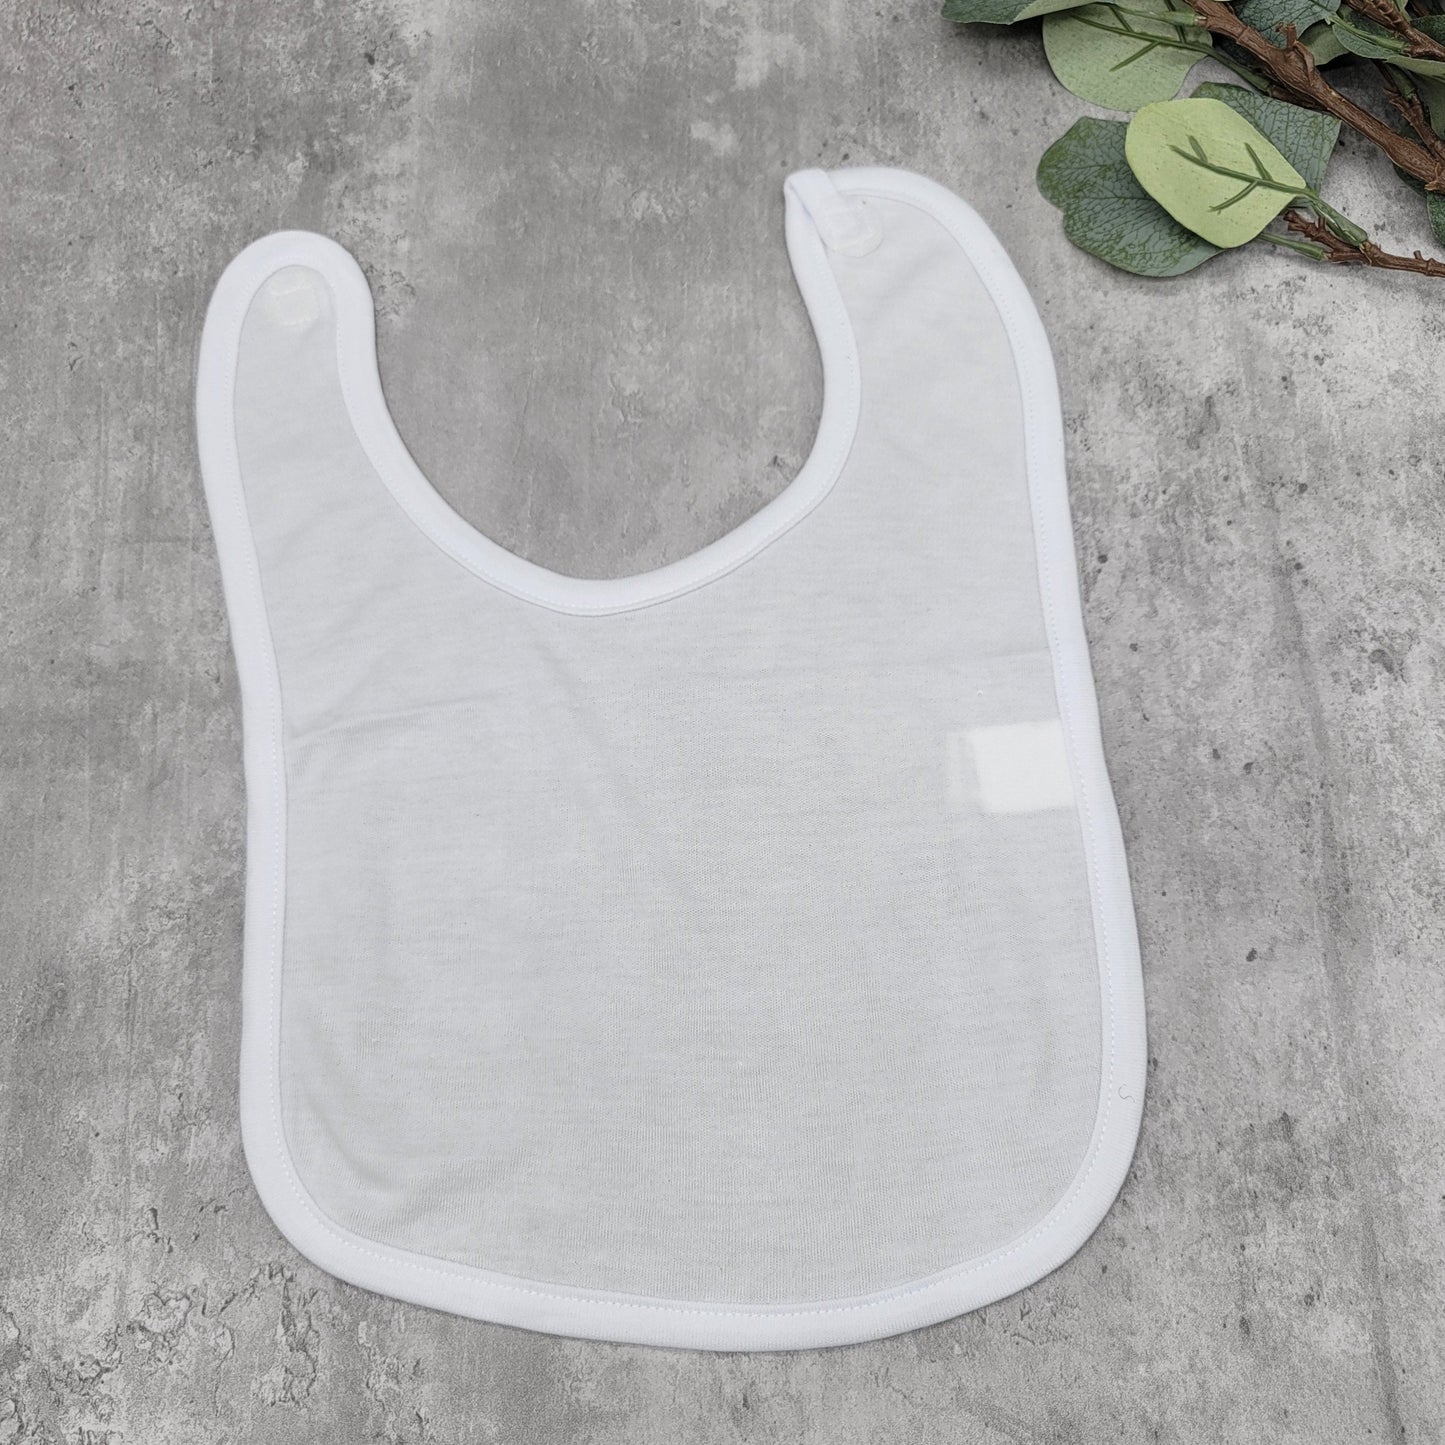 Baby Bib For Sublimation